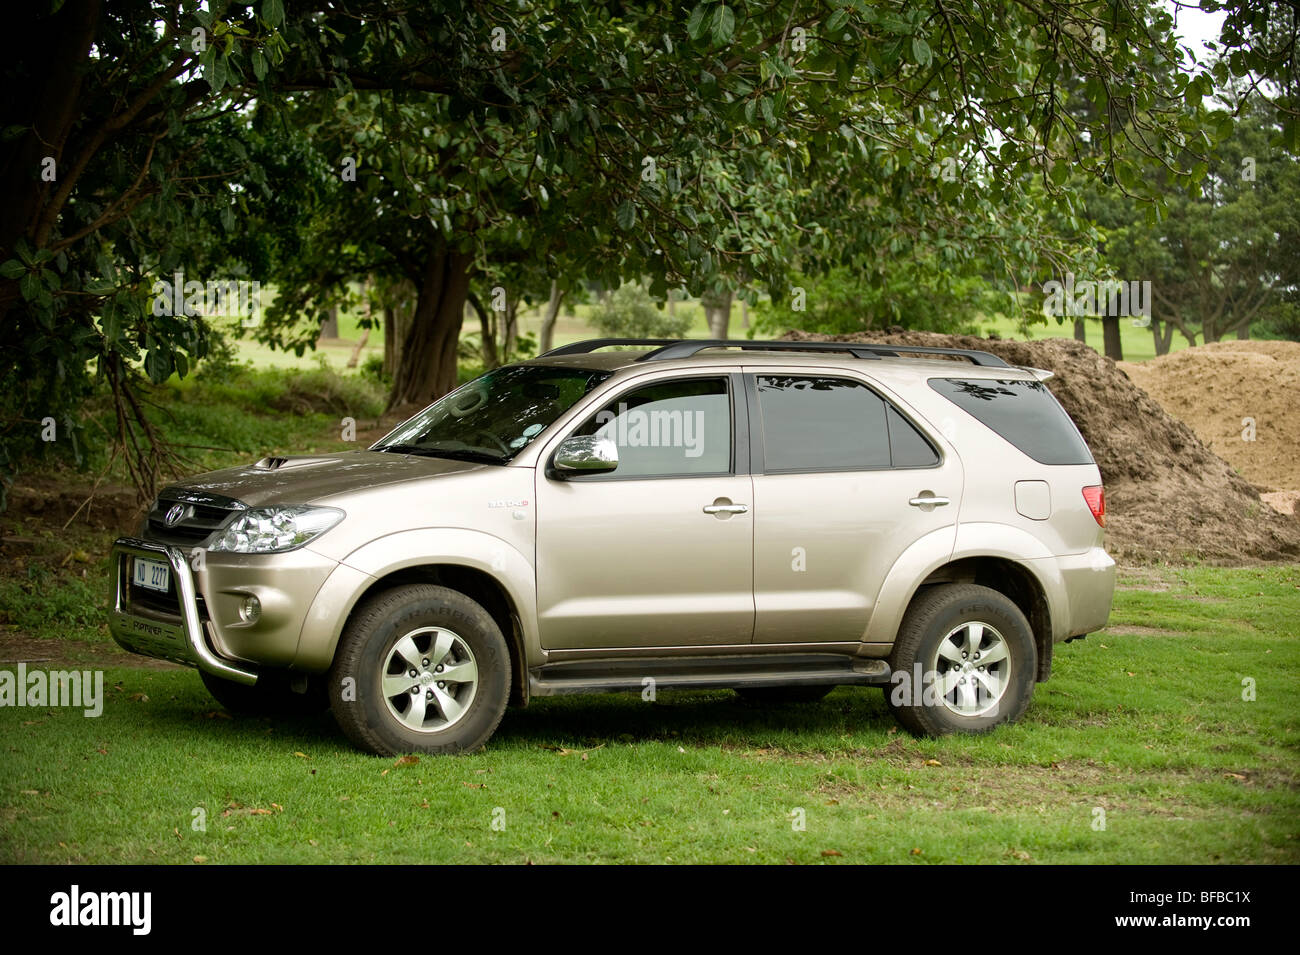 Toyota Fortuner. Durban, South Africa Stock Photo